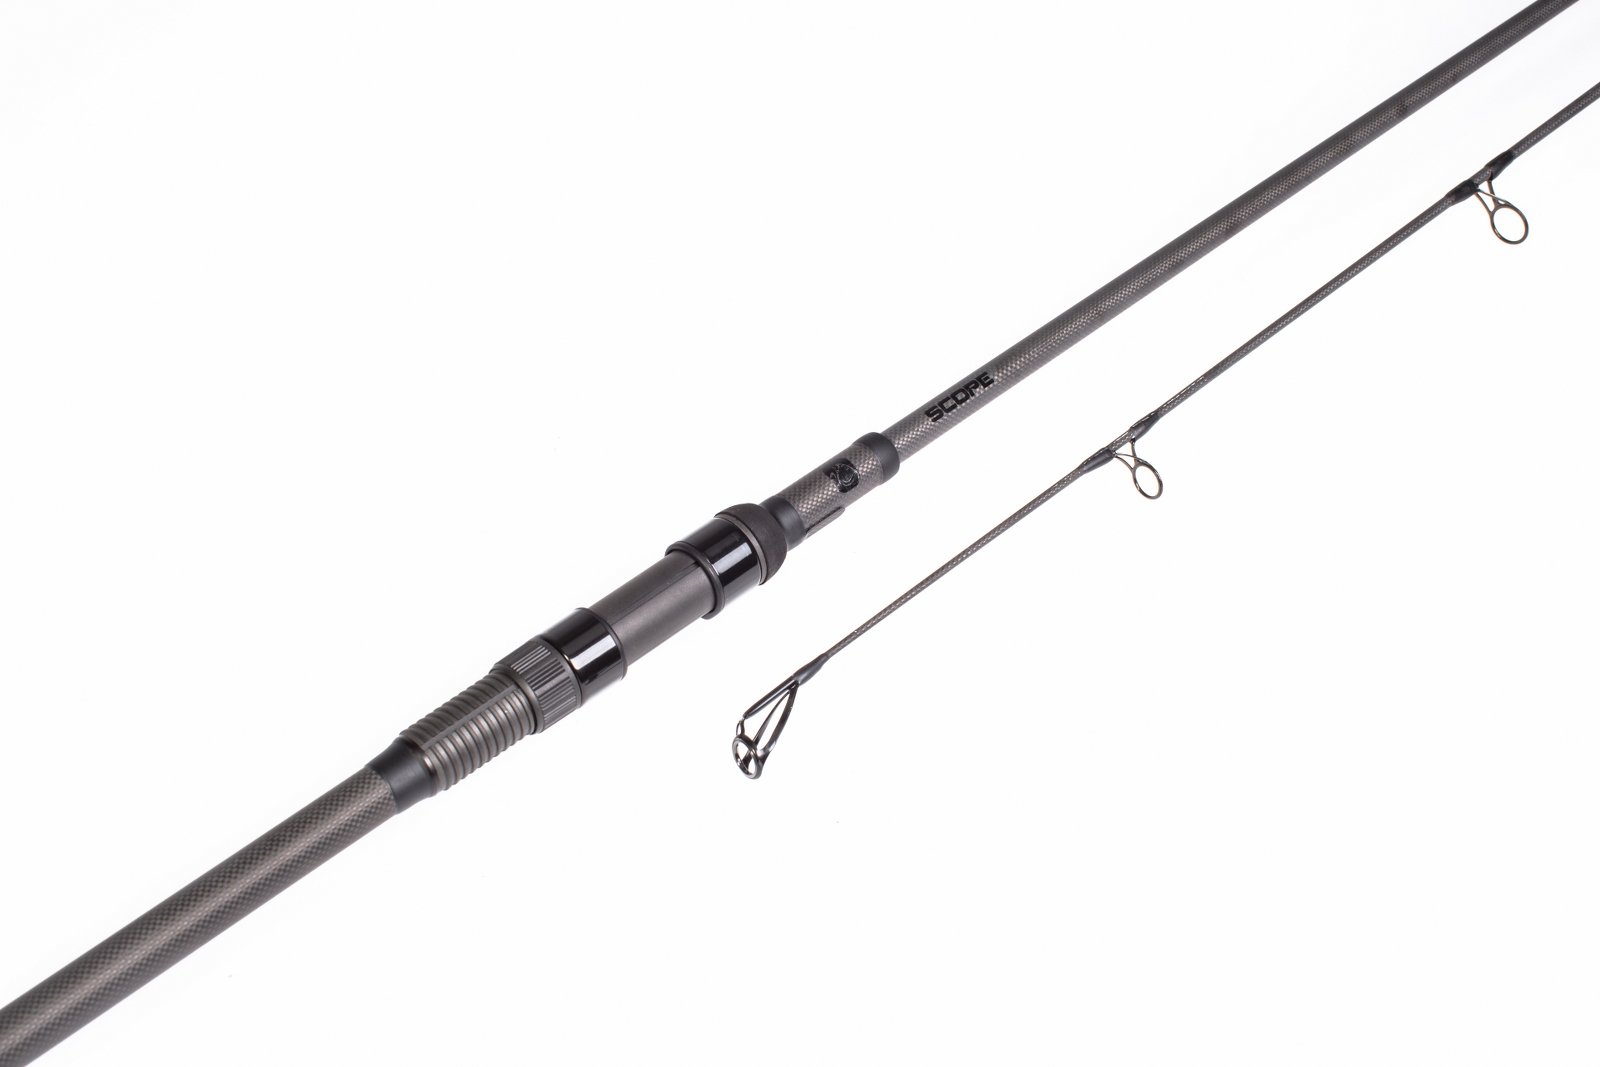 Nash Scope Abbreviated 9ft 3.5lb Scope Rods Tackle T1531 International Shop Europe